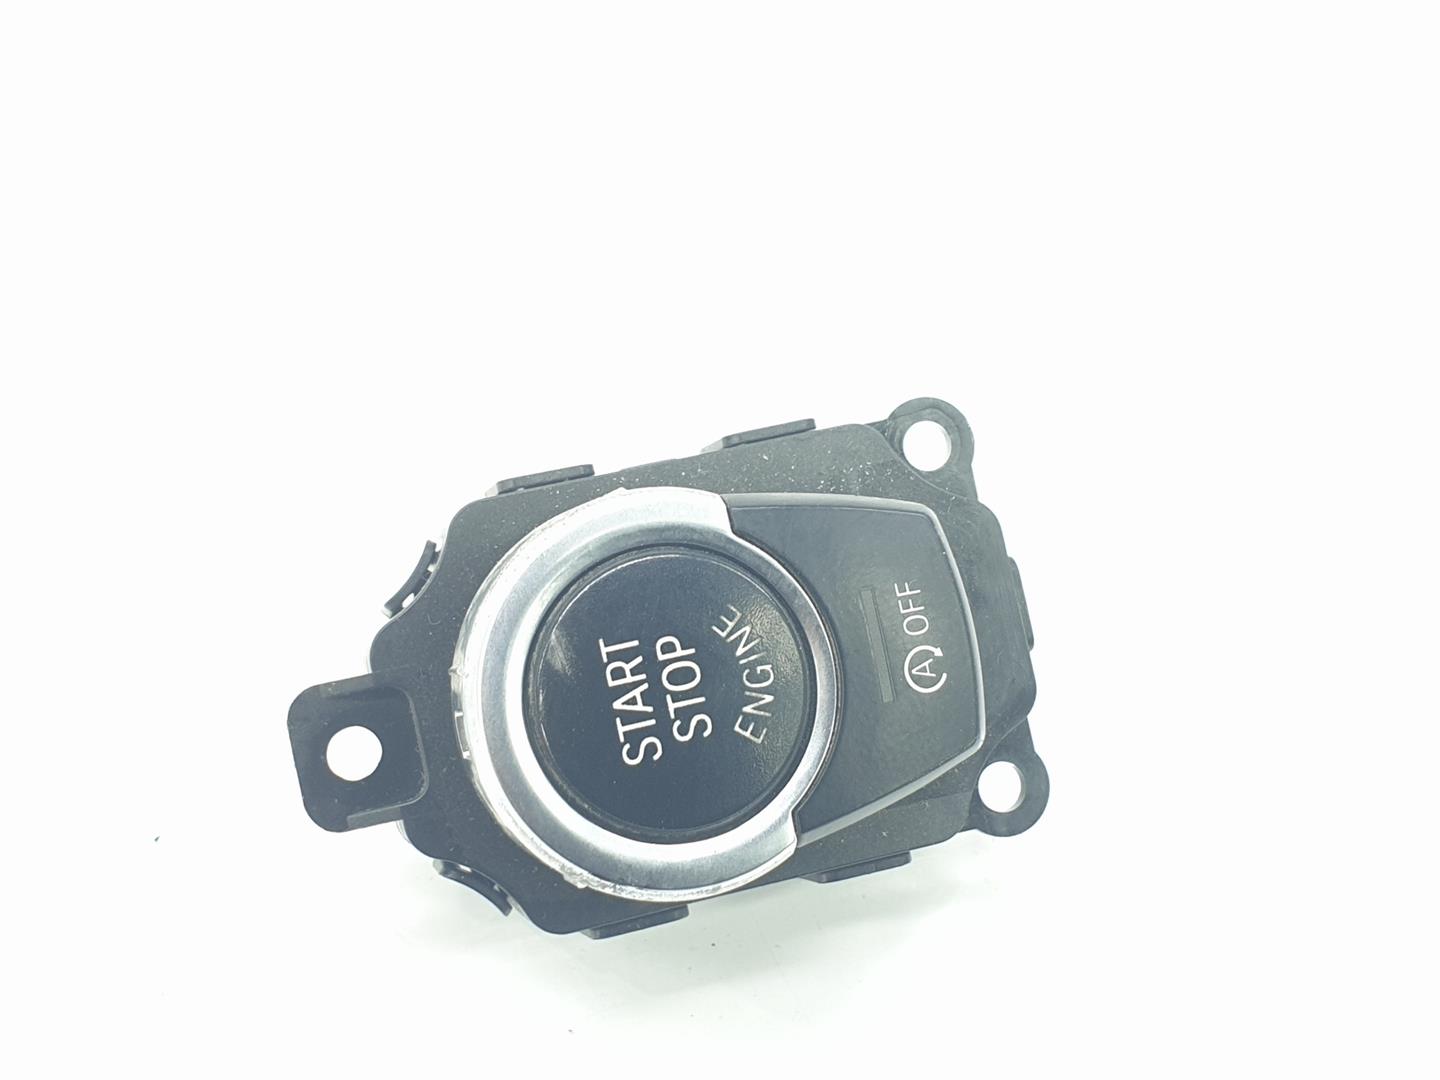 BMW 5 Series F10/F11 (2009-2017) Ignition Button 9263437, 61319153831 23752514